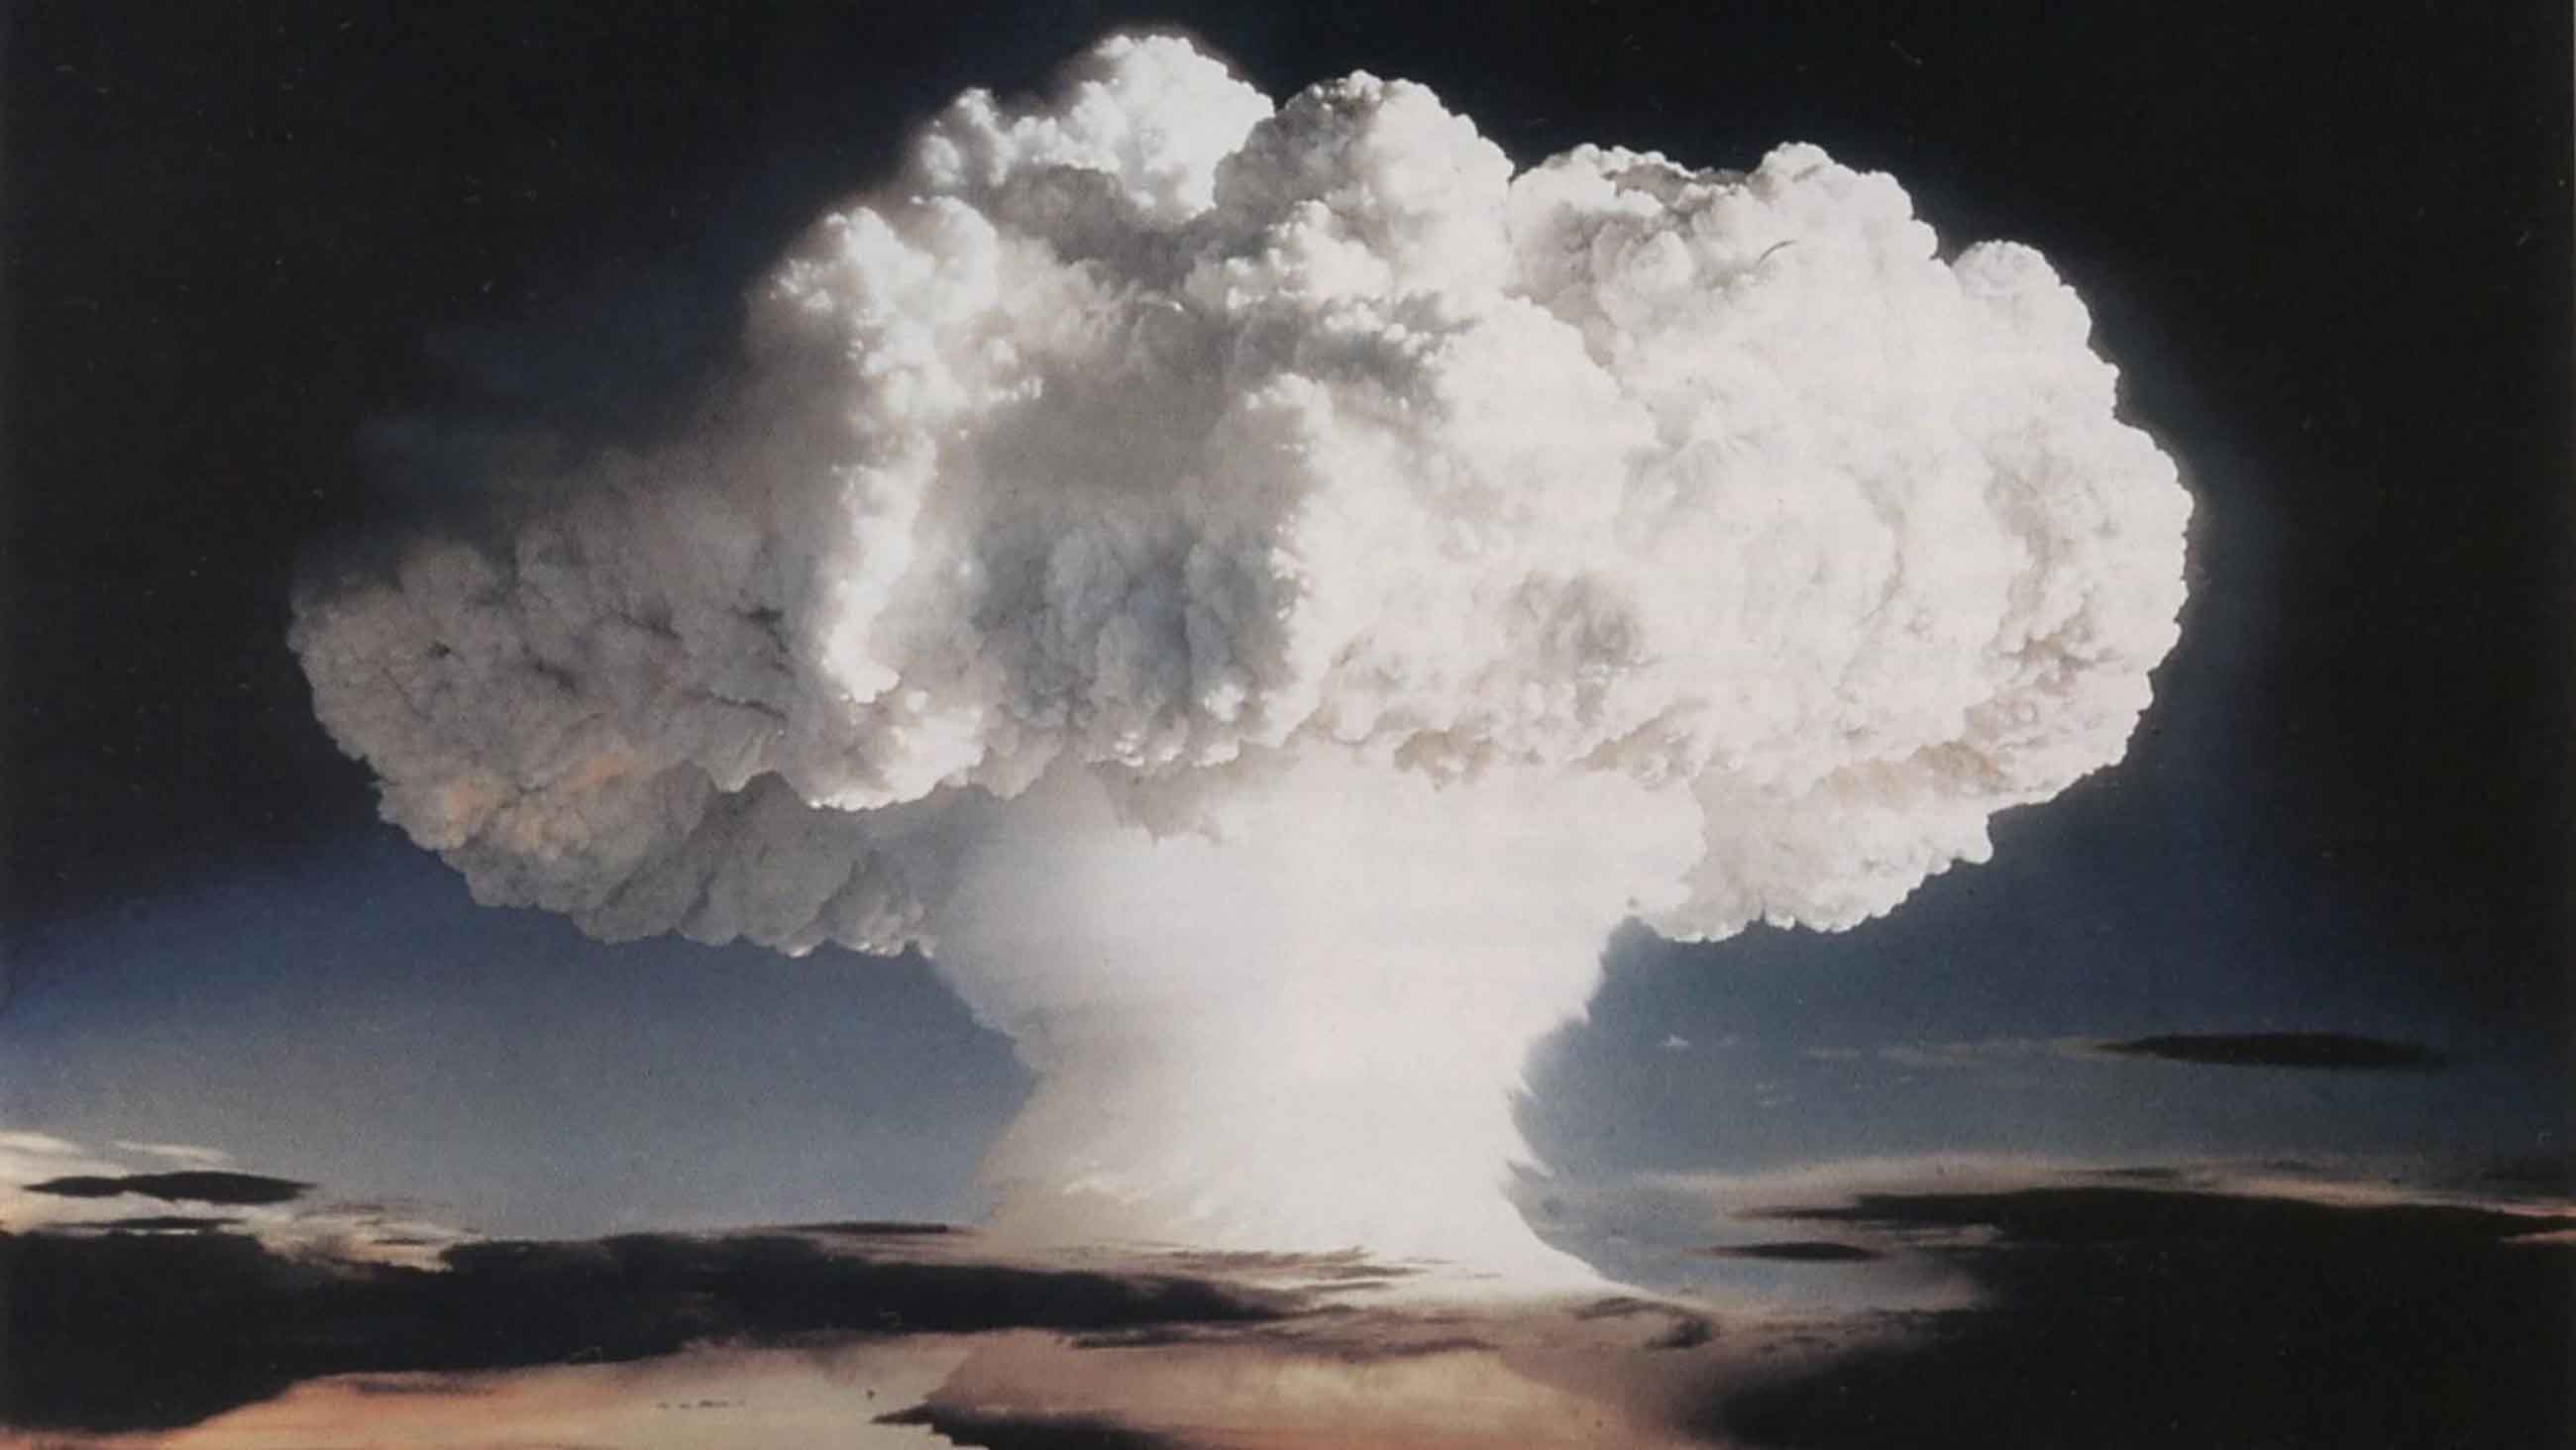 Ivy Mike, an atmospheric nuclear test conducted by the U.S. on Enewetak Atoll in 1952, was the world's first successful hydrogen bomb.